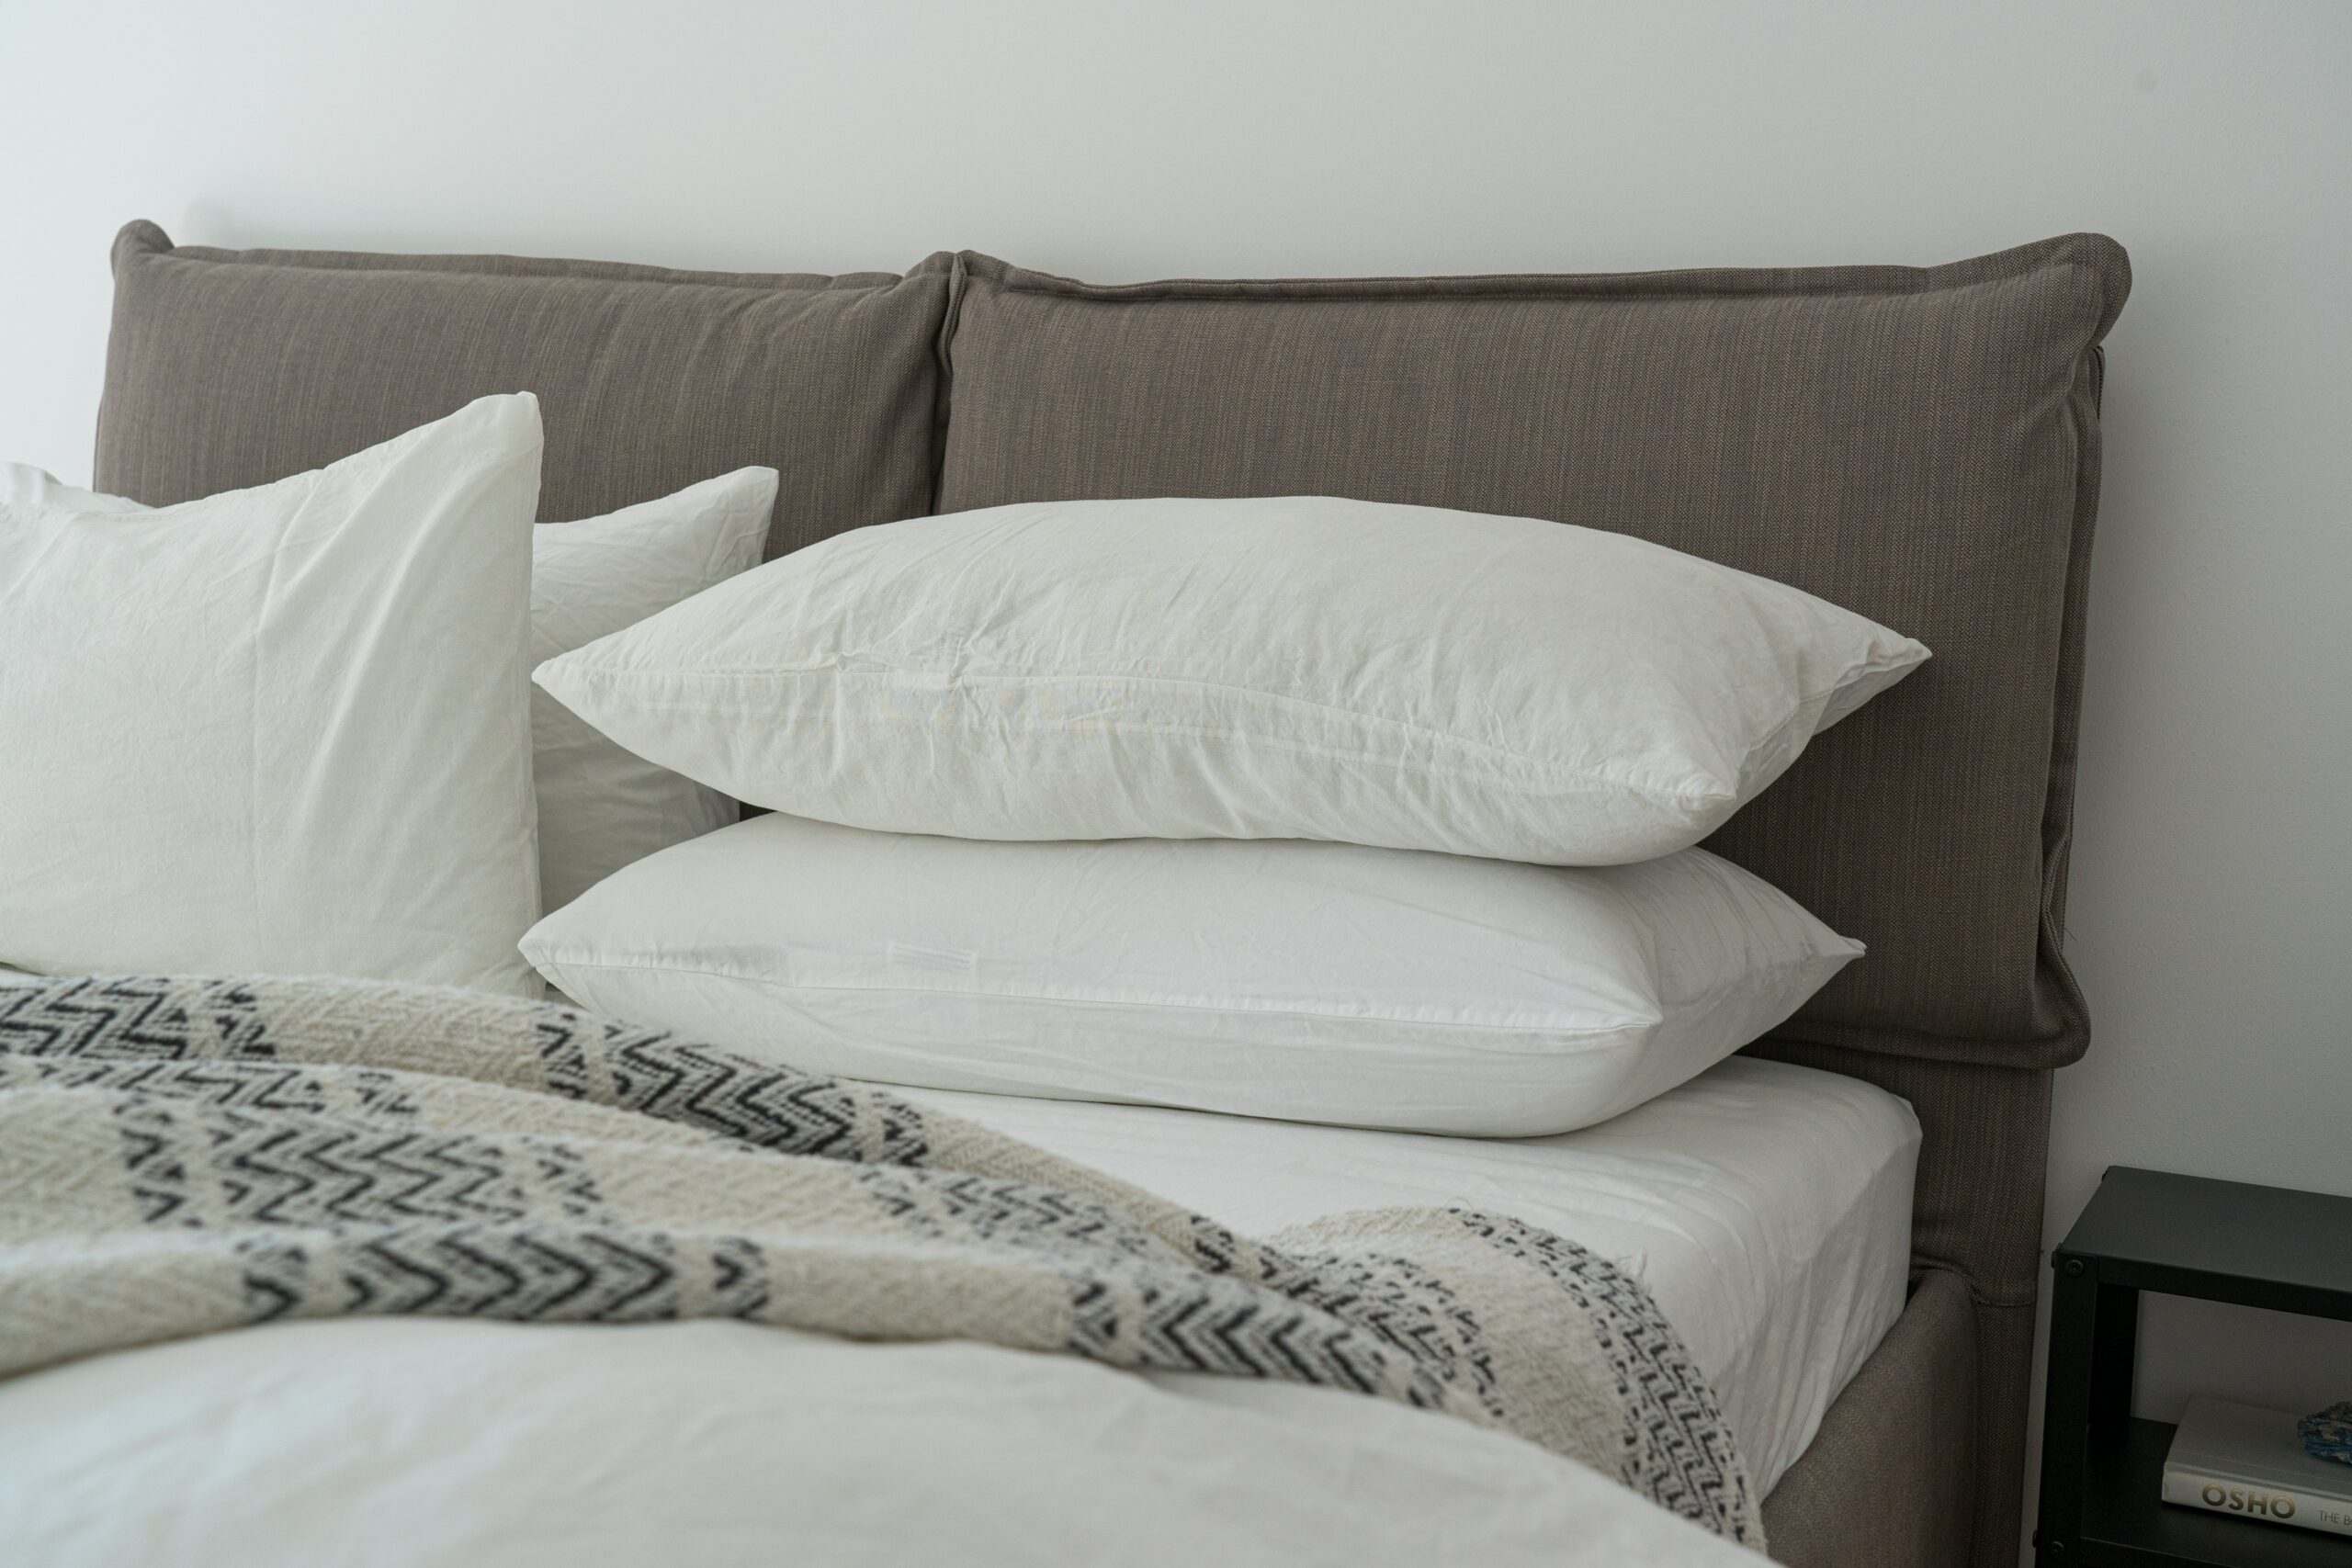 Why Do Feather Pillows Smell?